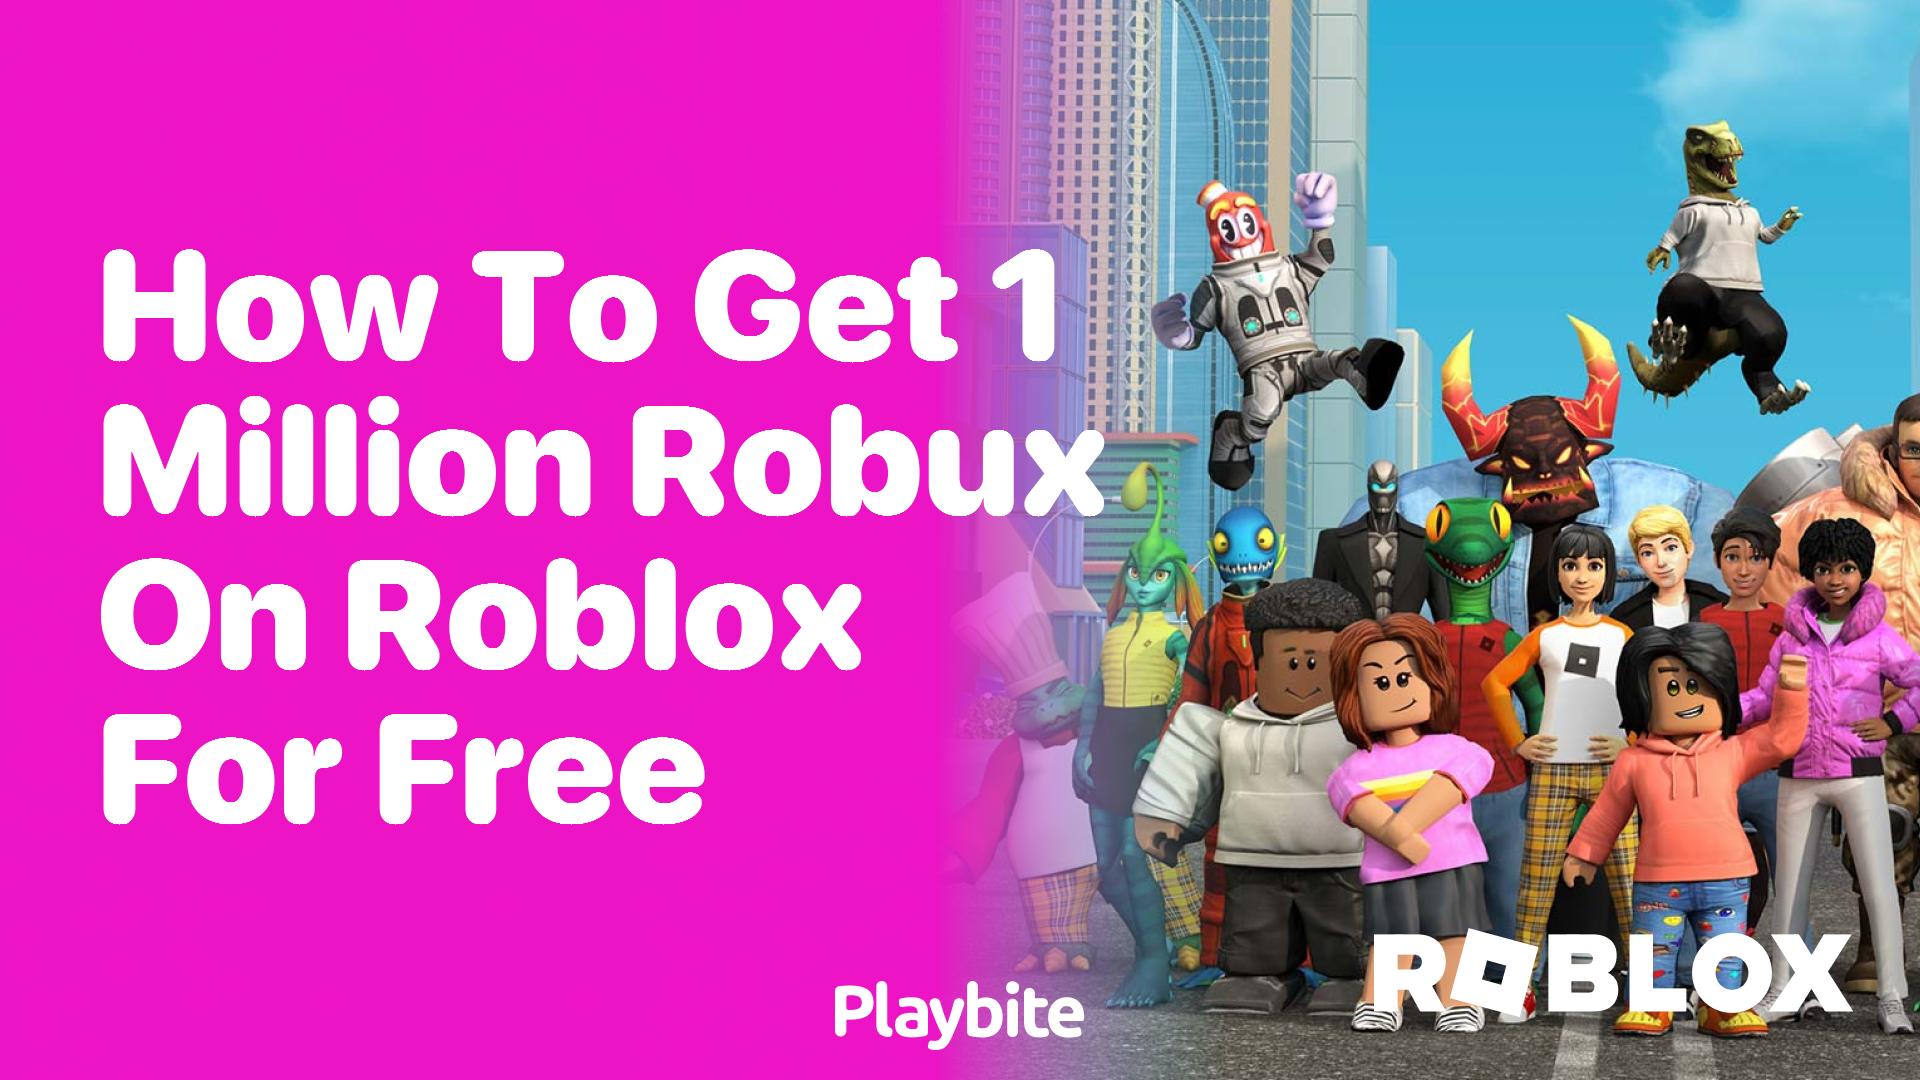 How to Get 1 Million Robux on Roblox for Free?